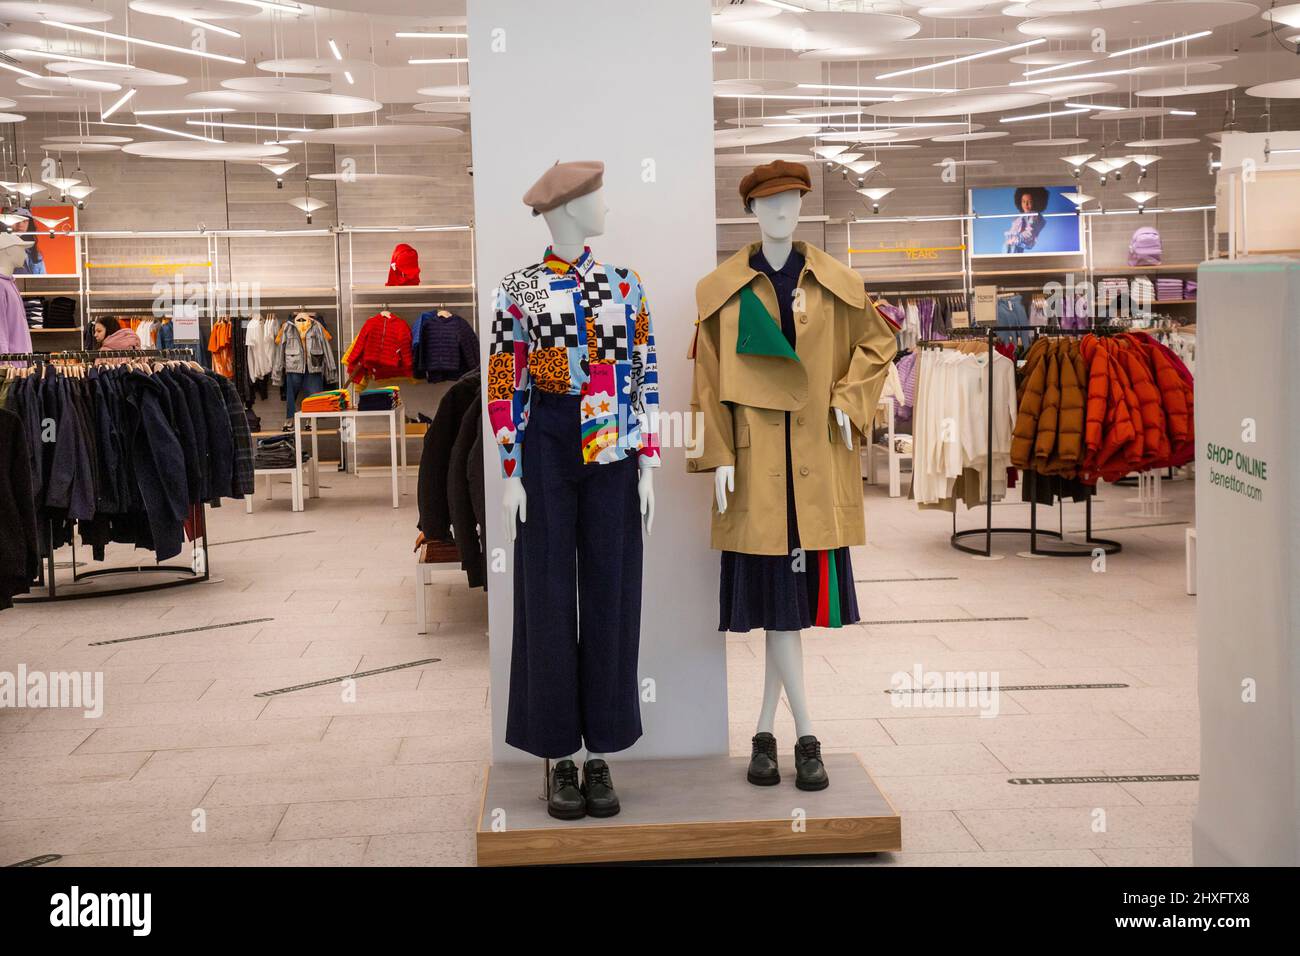 Moscow, Russia. 12th April, 2022. View of an shop interior of the United Colors of Benetton company at the Metropolis shopping mall on Leningradskoe shosse in Moscow, Russia Stock Photo